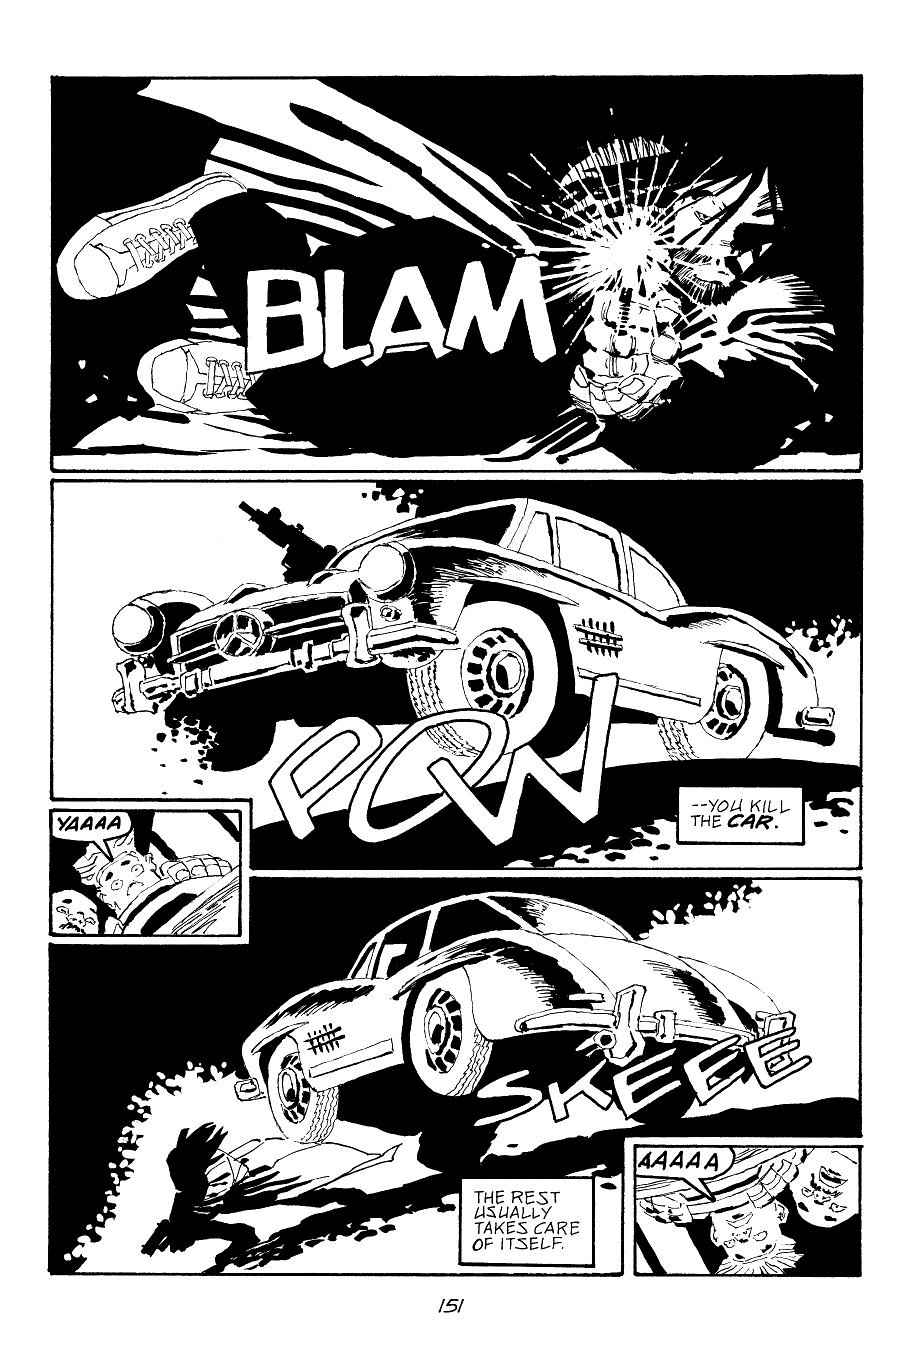 page 151 of sin city 7 hell and back